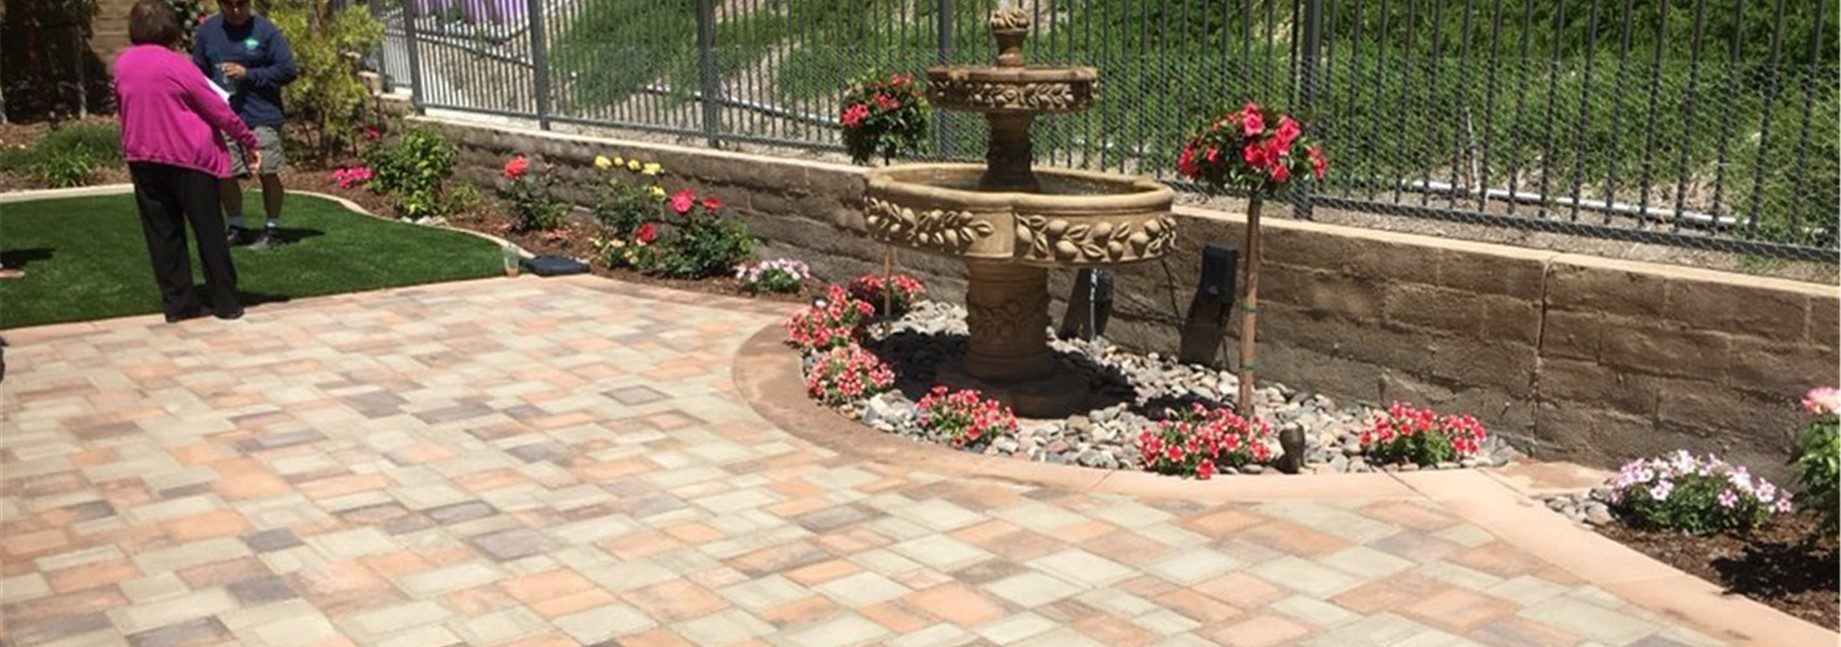 Patios Are The Base Of Any Outdoor Living Area, Inland Empire Pavers